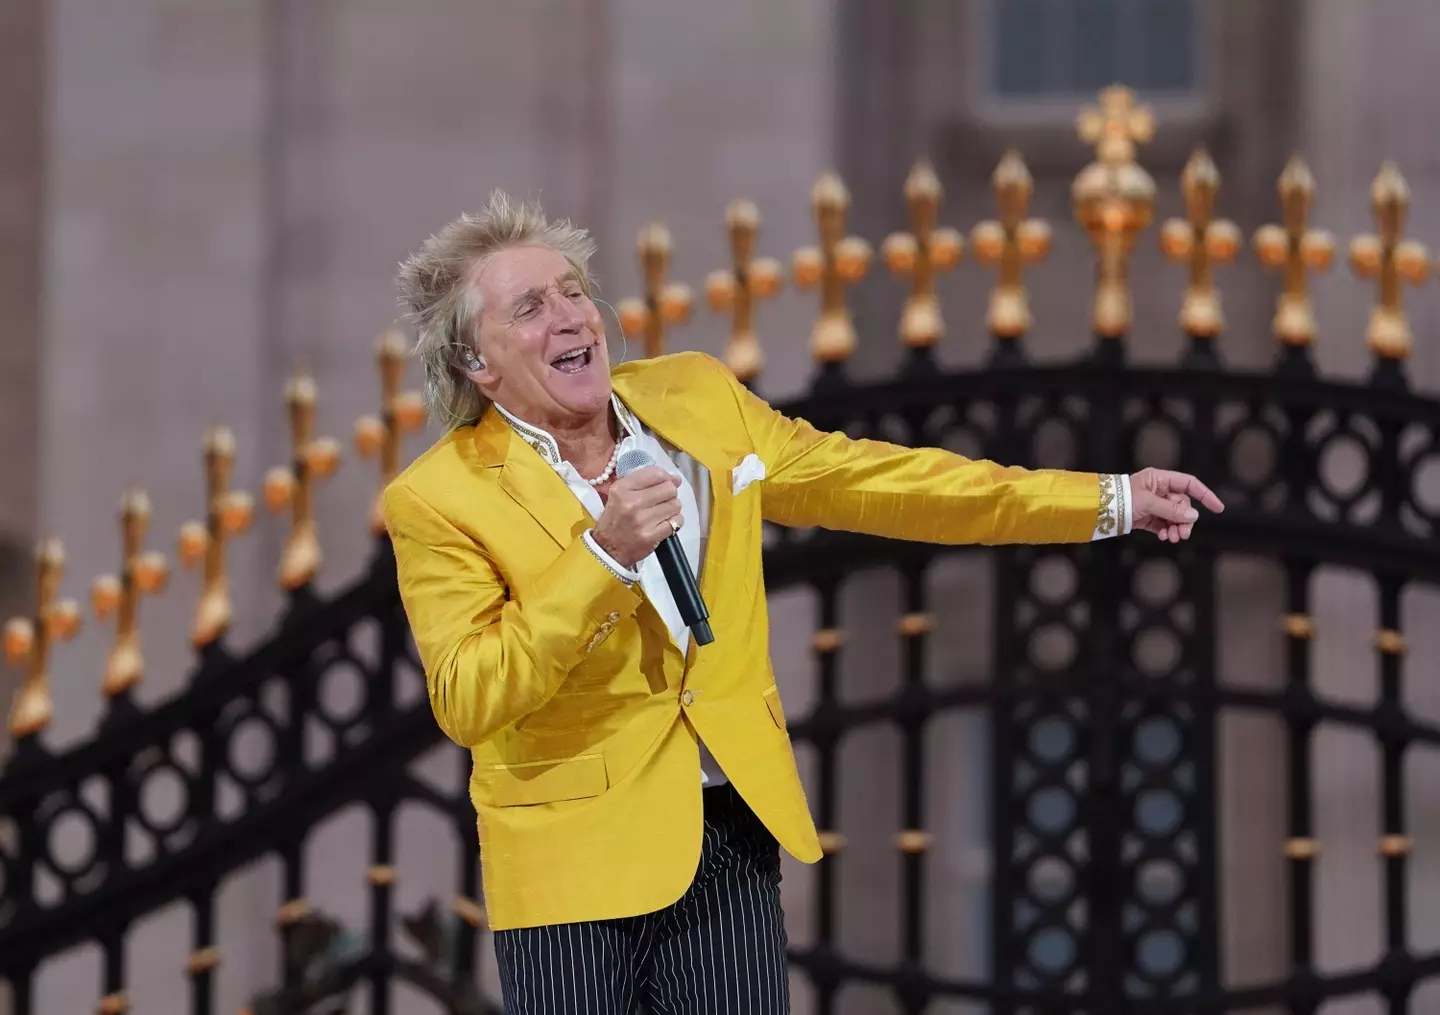 Sir Rod Stewart performed Sweet Caroline at the Platinum Party as a part of the Queen's Platinum Jubilee celebrations.